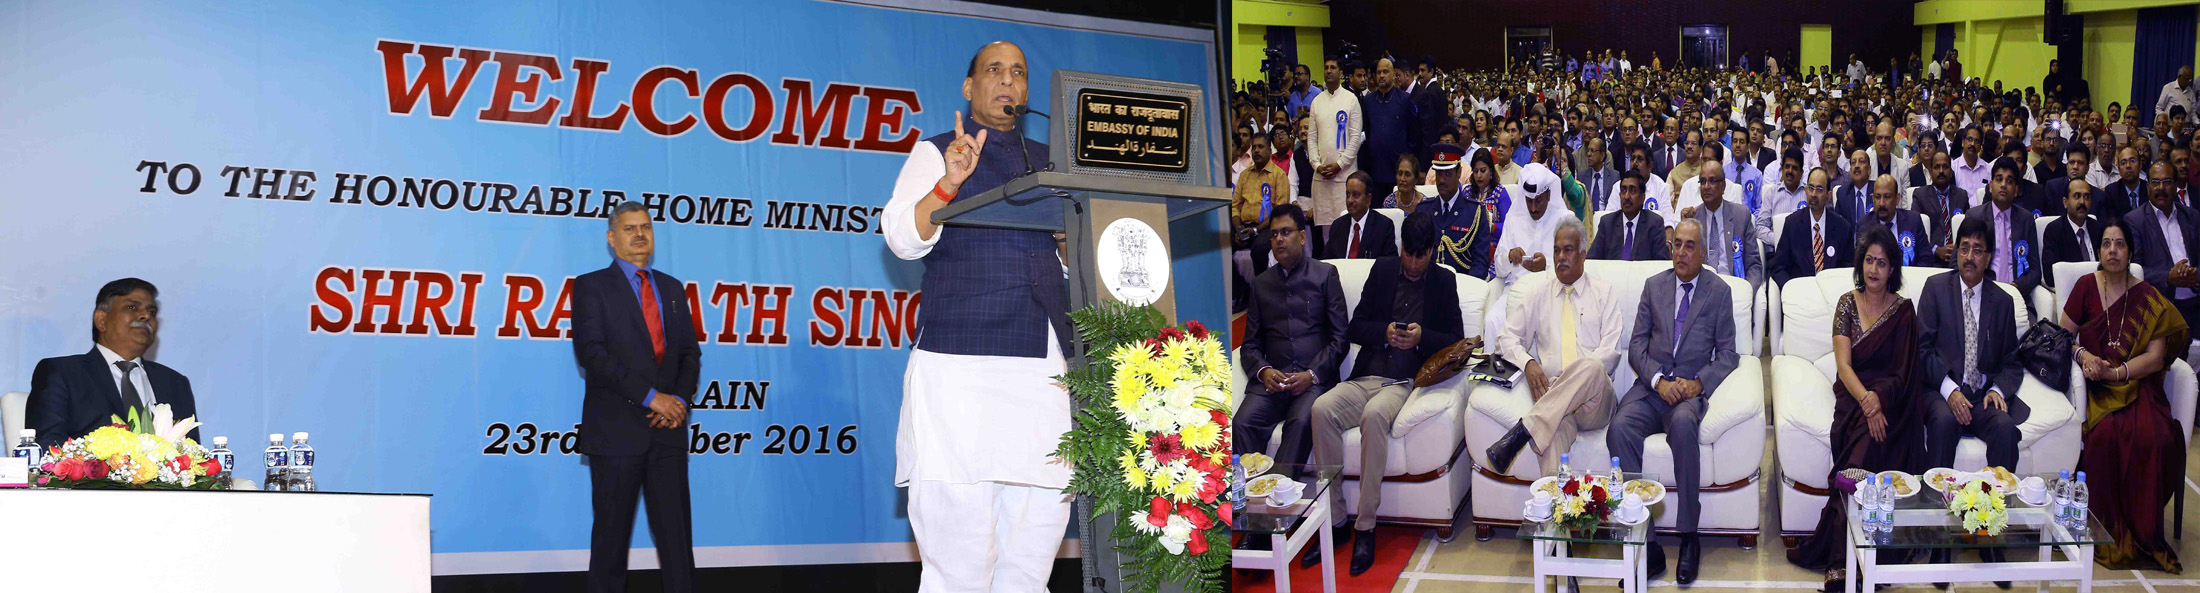 The Union Home Minister, Shri Rajnath Singh addressing the Indian community, in Manama, Bahrain on October 23, 2016.